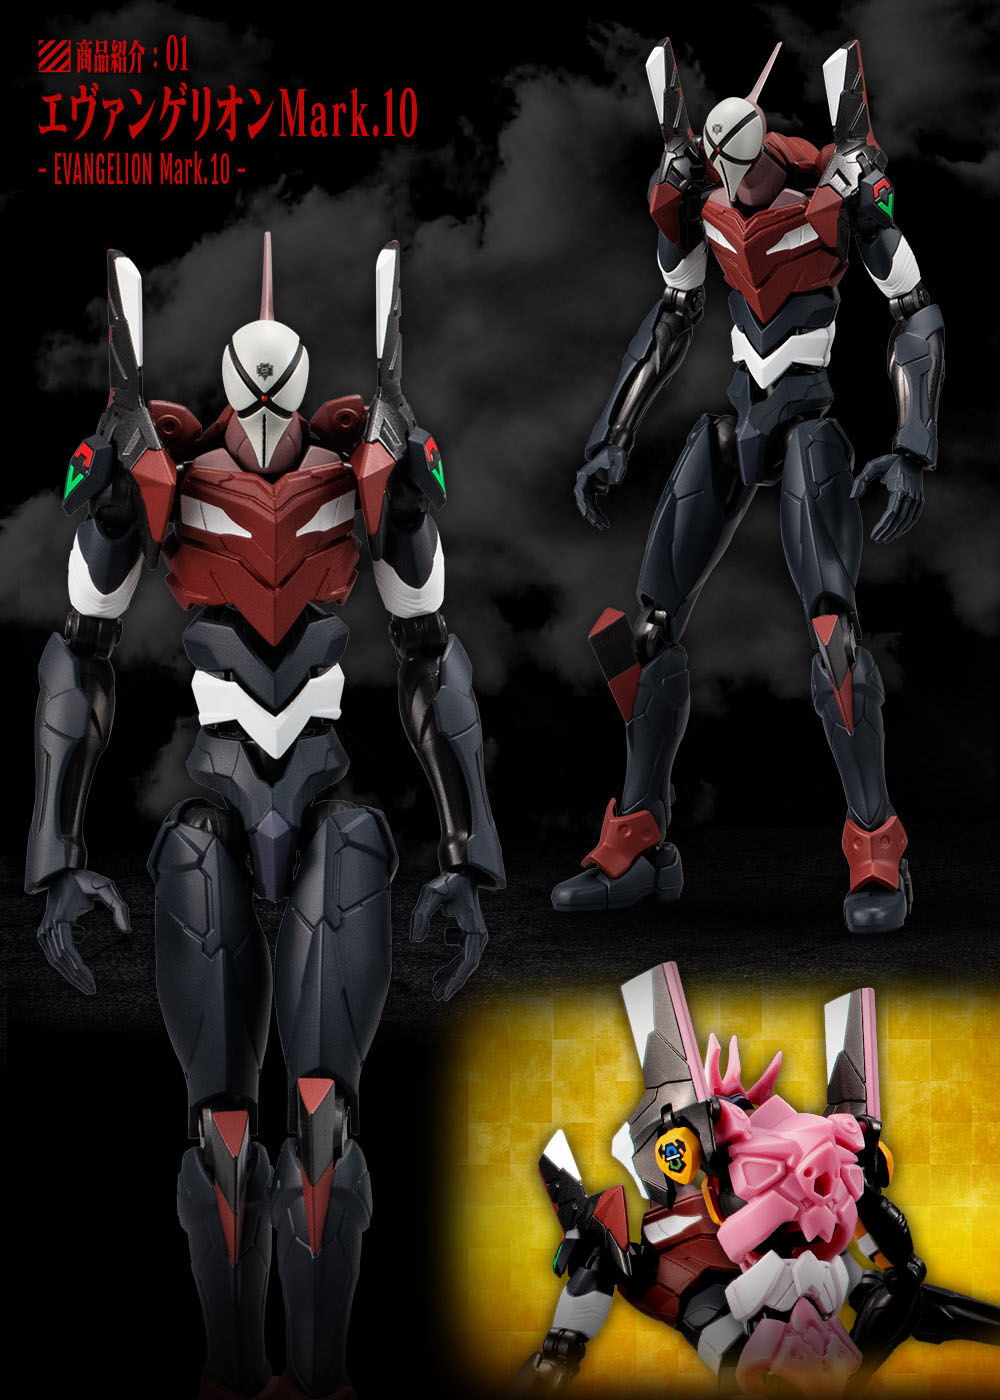 Evangelion Frame-New Theatrical Edition 04 Overlapping Set 2